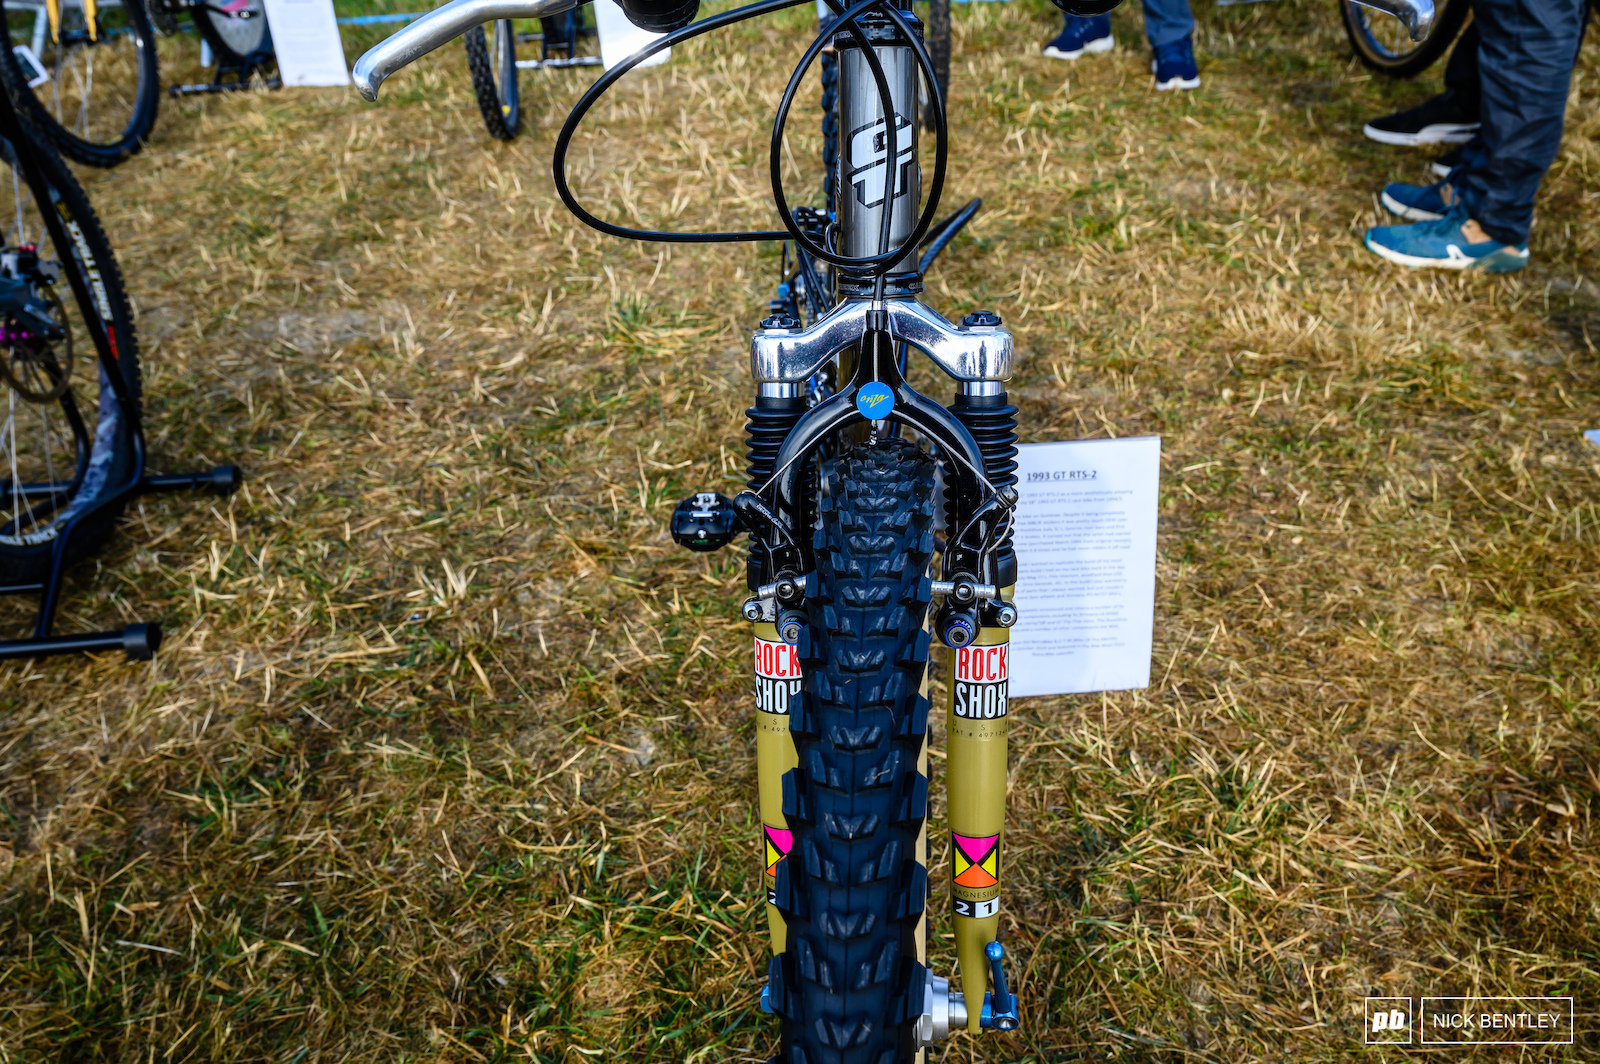 Just how good do these classic RockShox forks look 